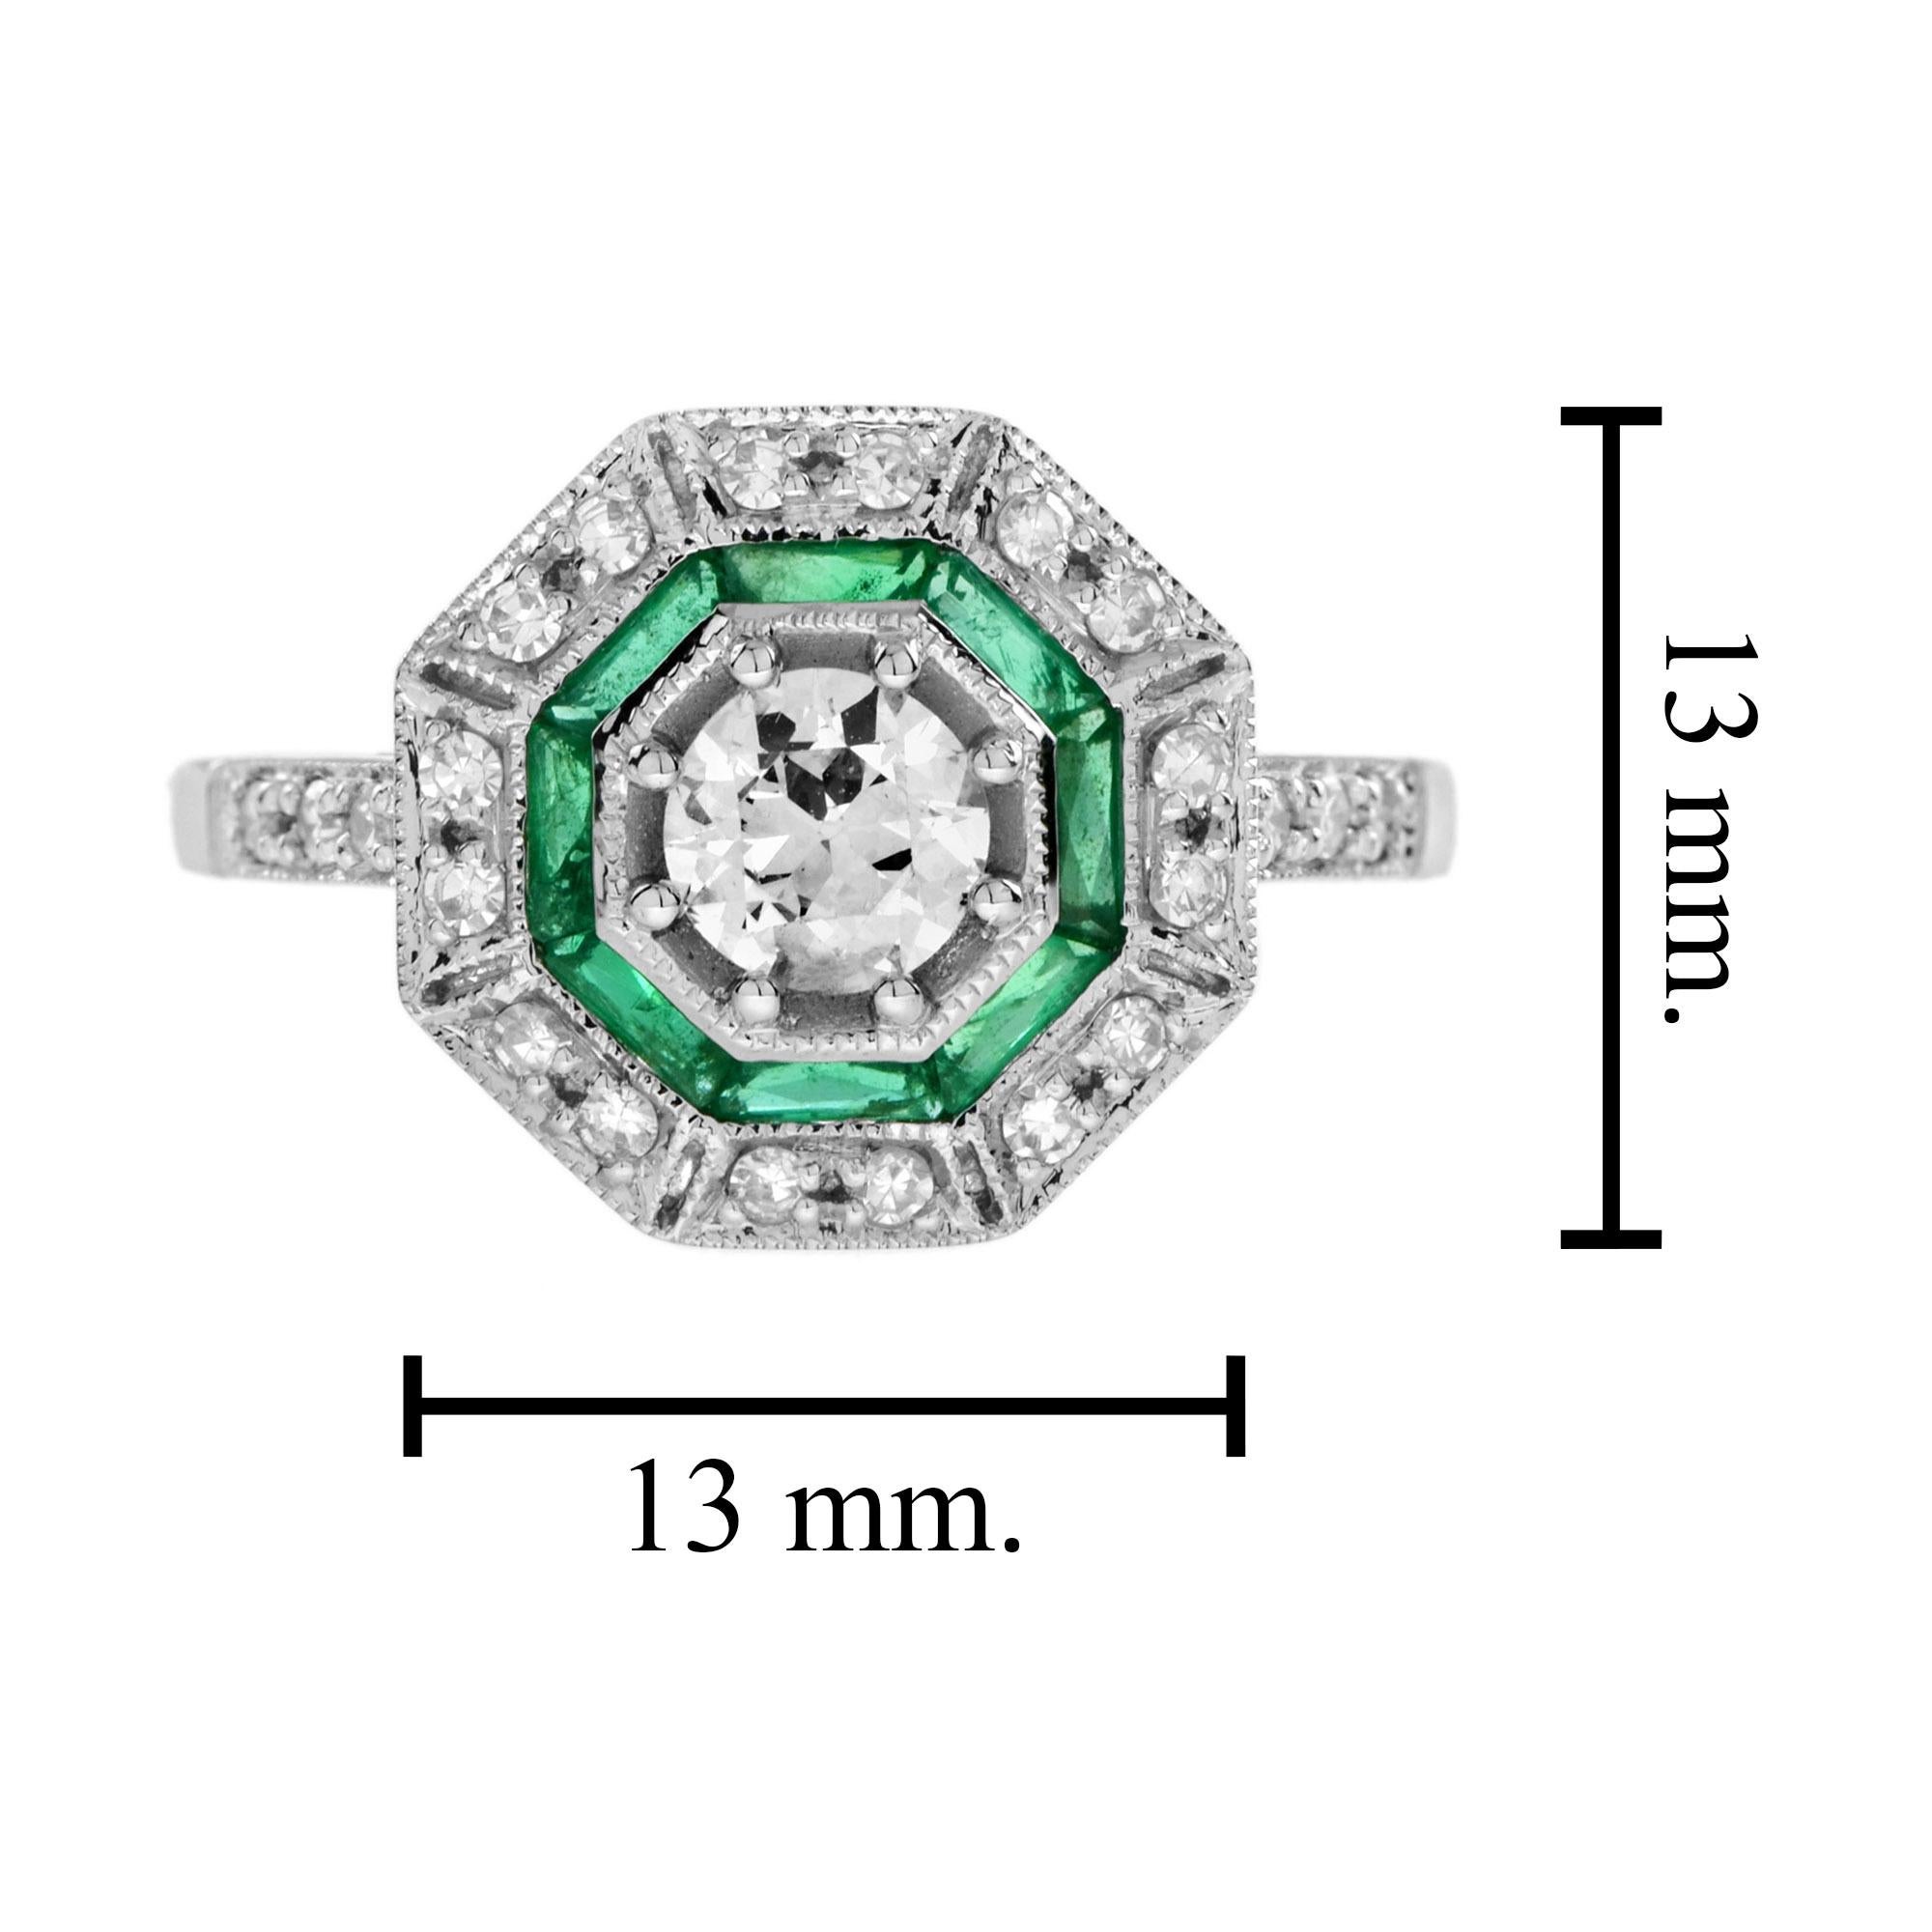 Women's Diamond and Emerald Octagonal Shape Ring in 18k White Gold